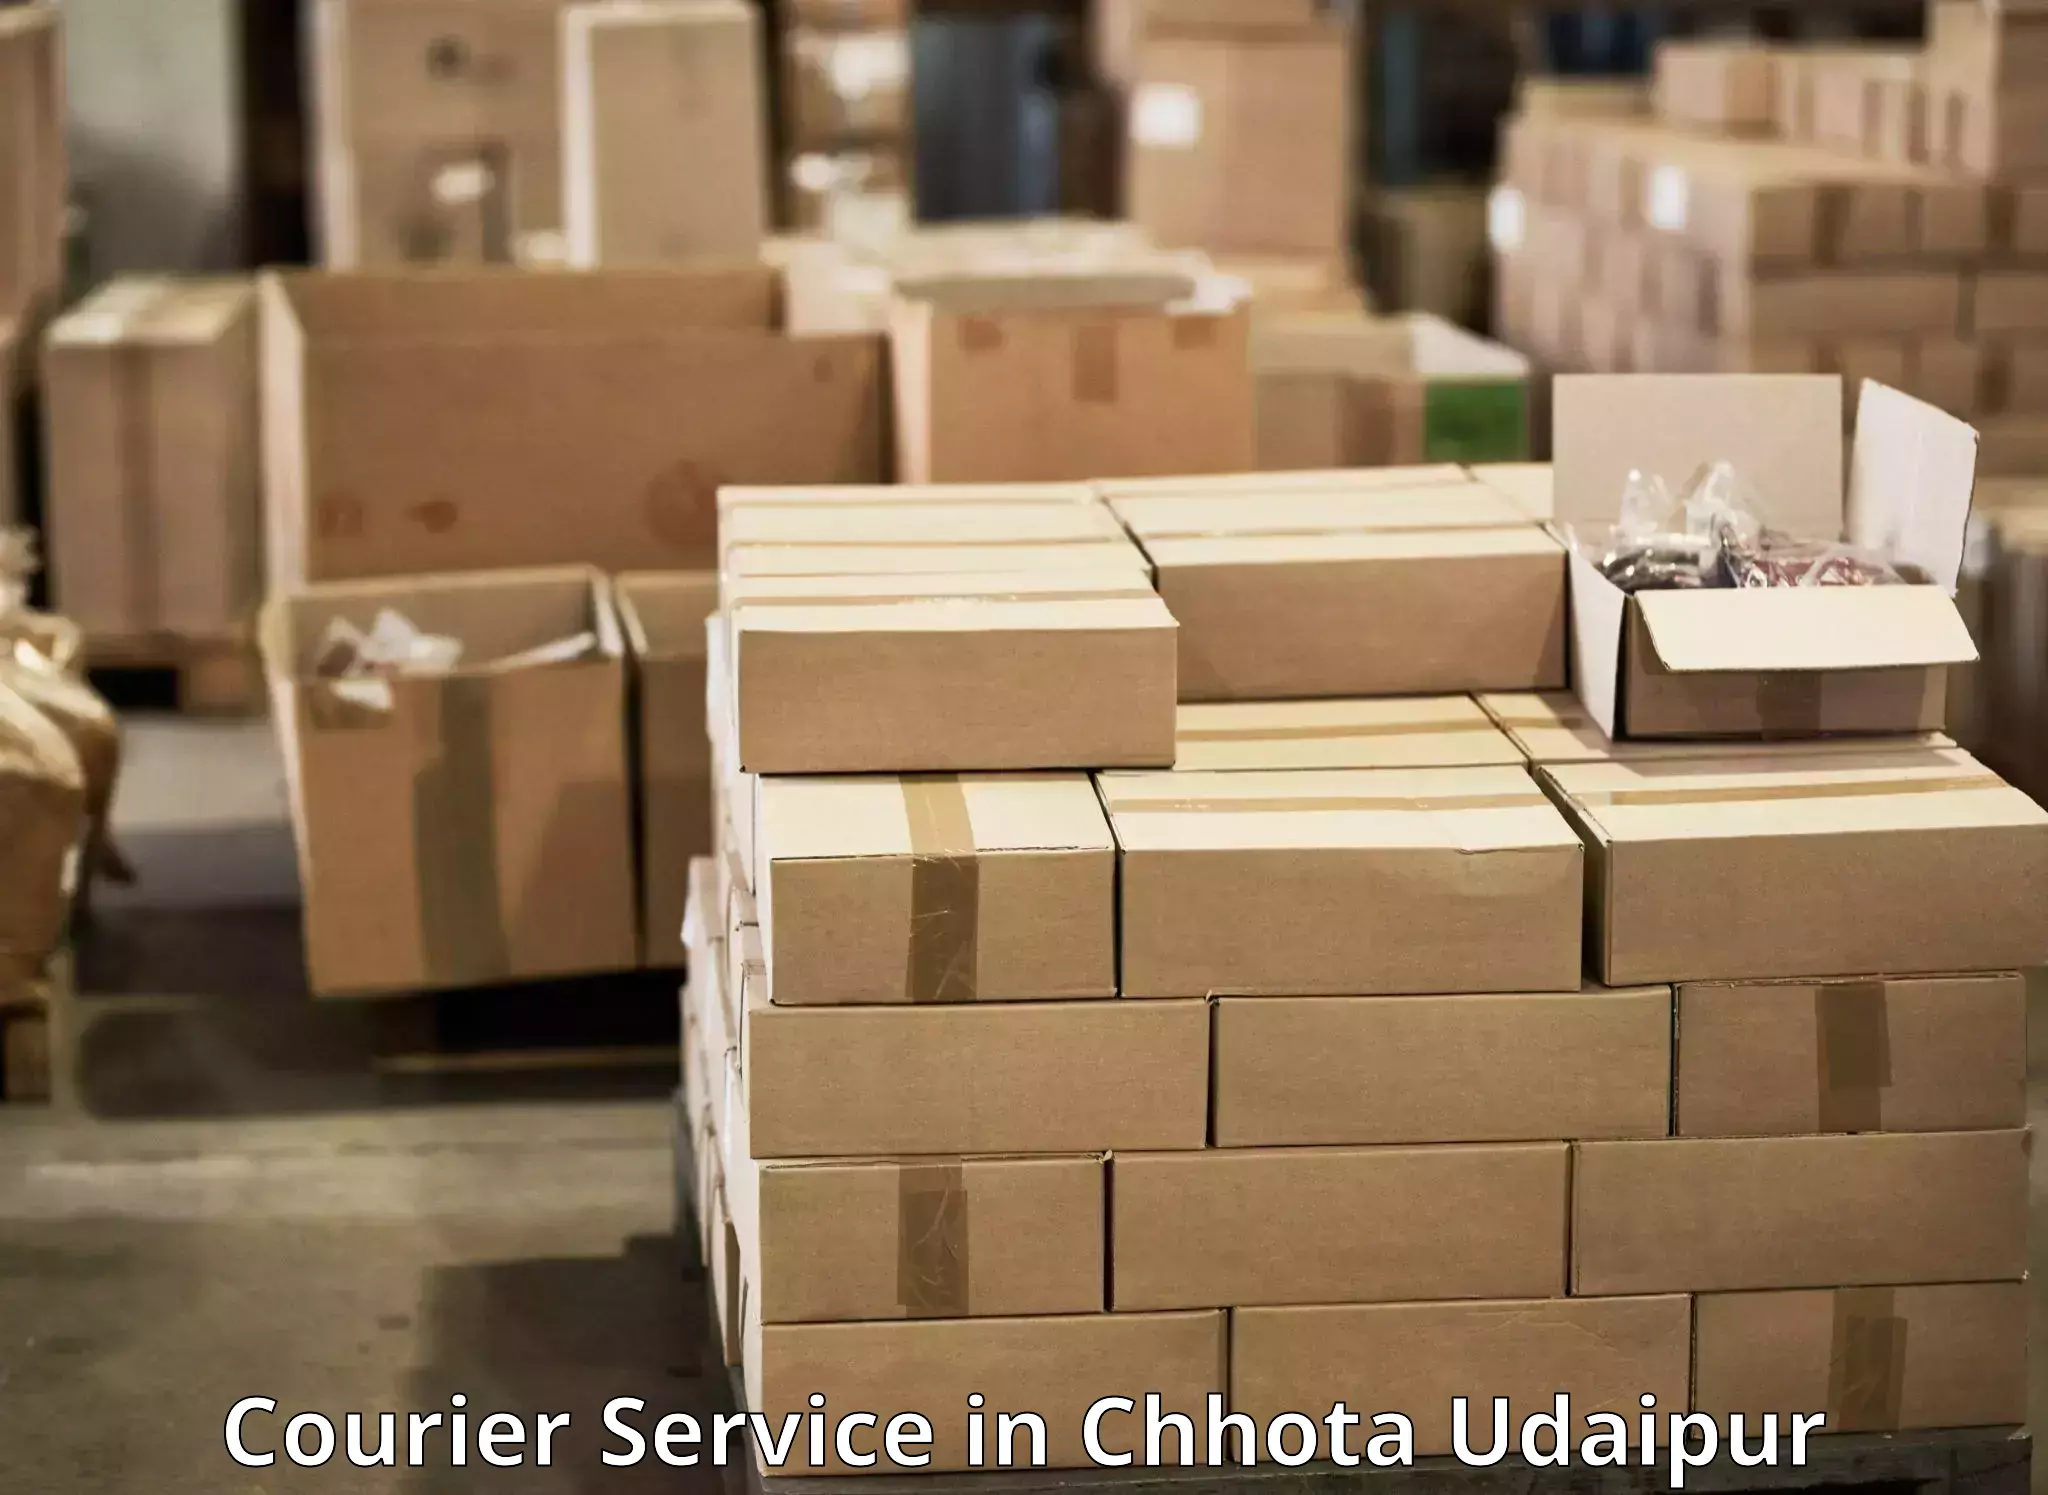 Efficient parcel service in Chhota Udaipur